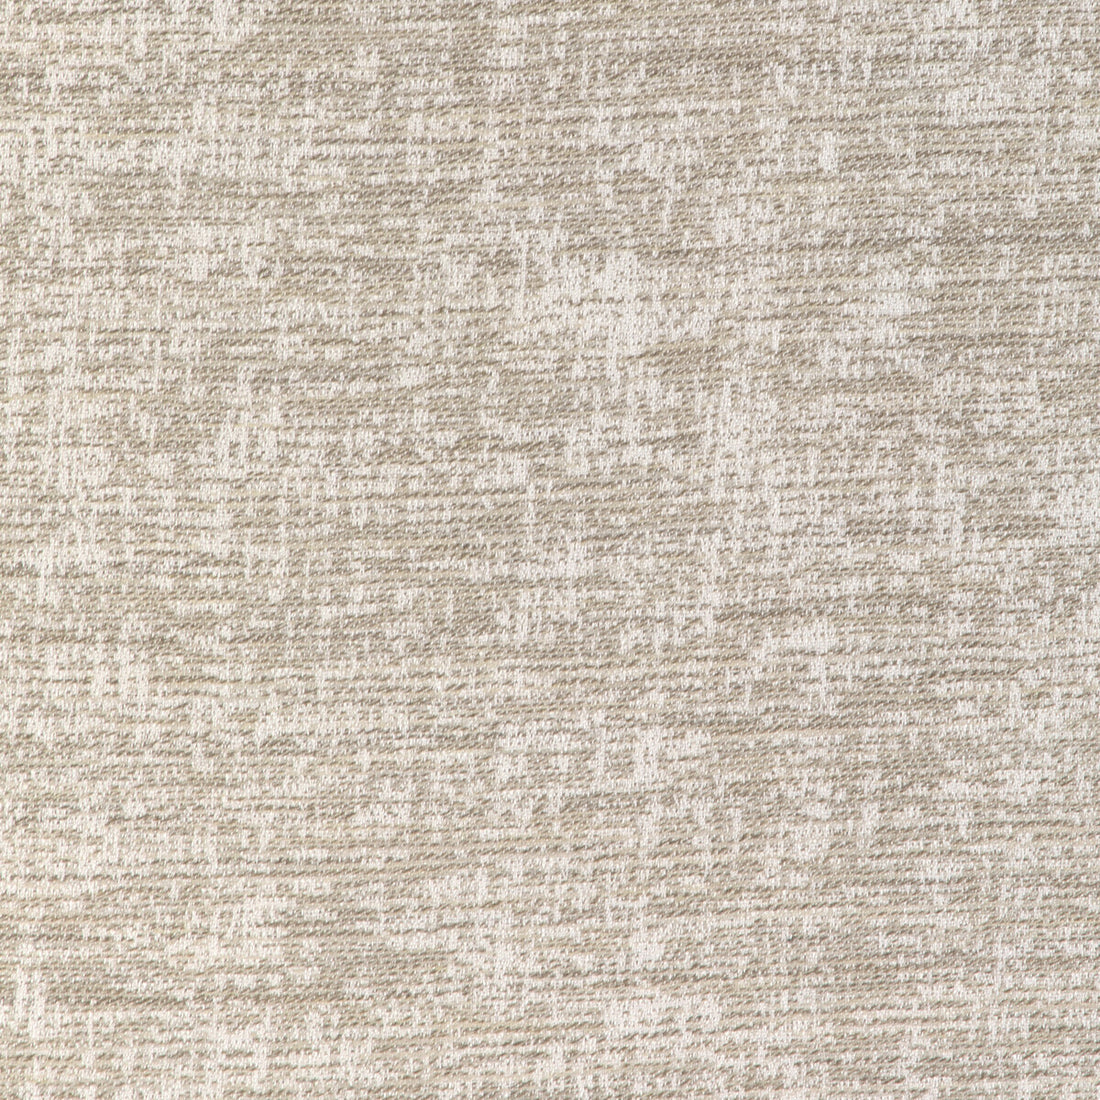 Seadrift fabric in sand color - pattern 36919.16.0 - by Kravet Couture in the Riviera collection